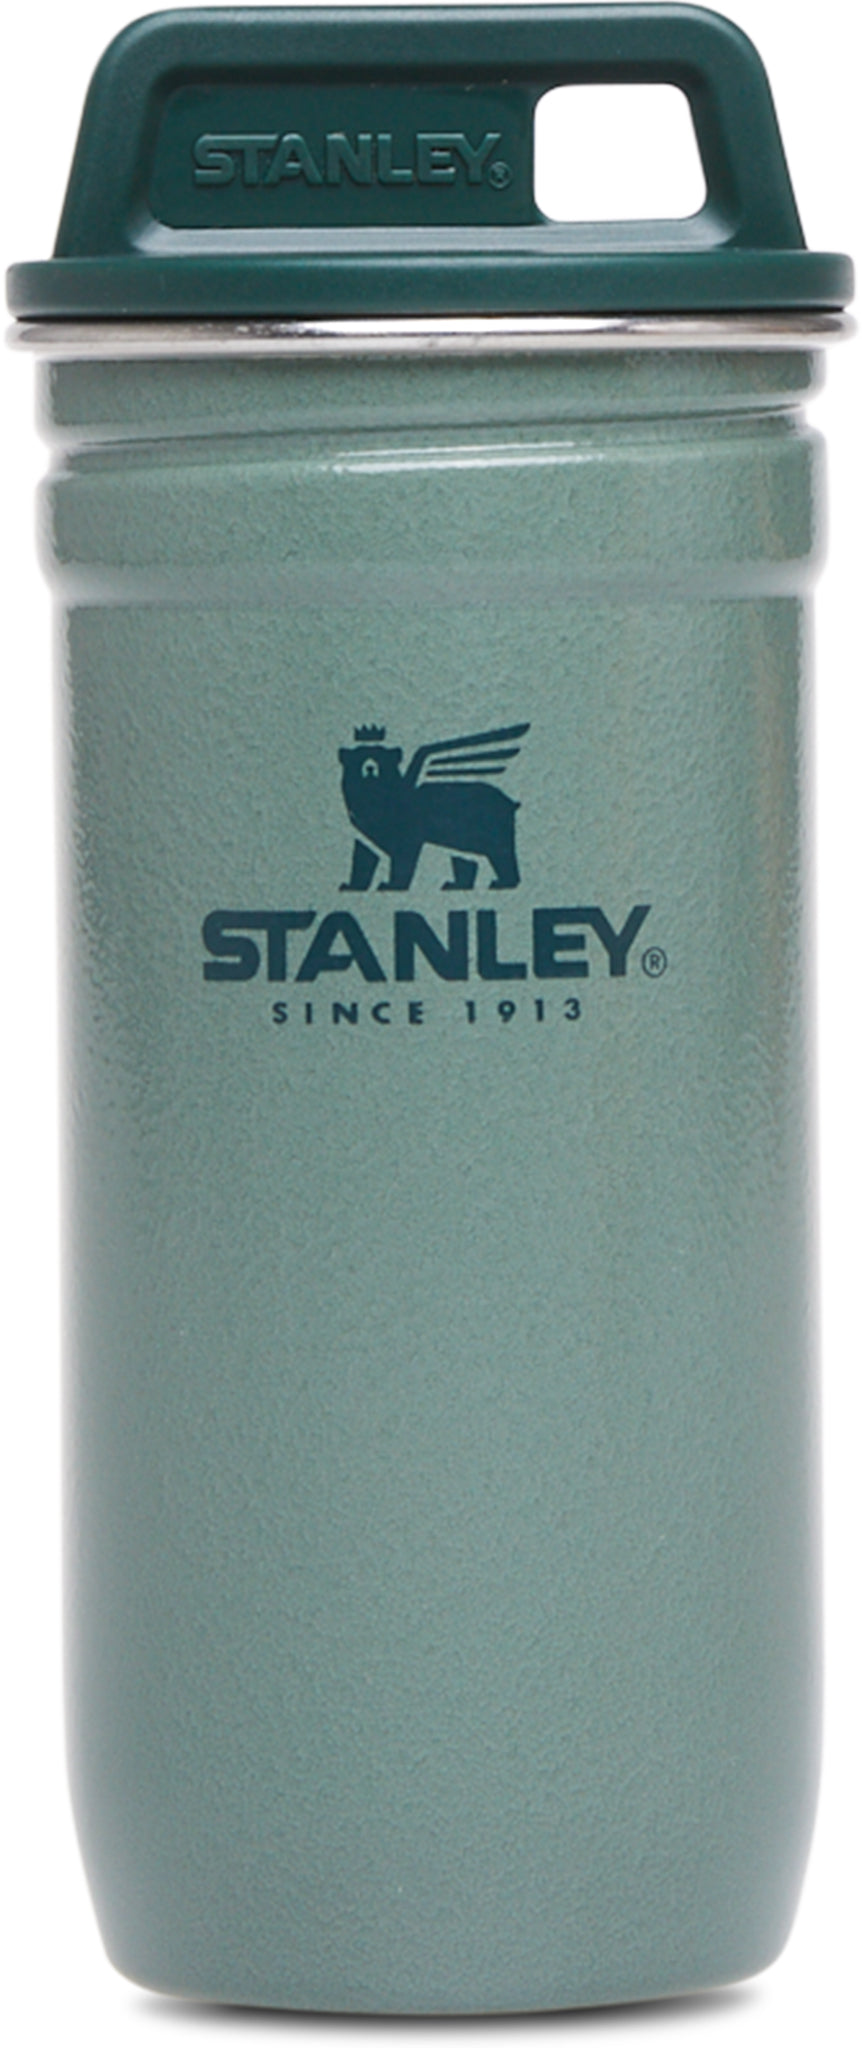 Stanley Stainless Steel Shot Glass Set Only $10.42 (Reg. $20)